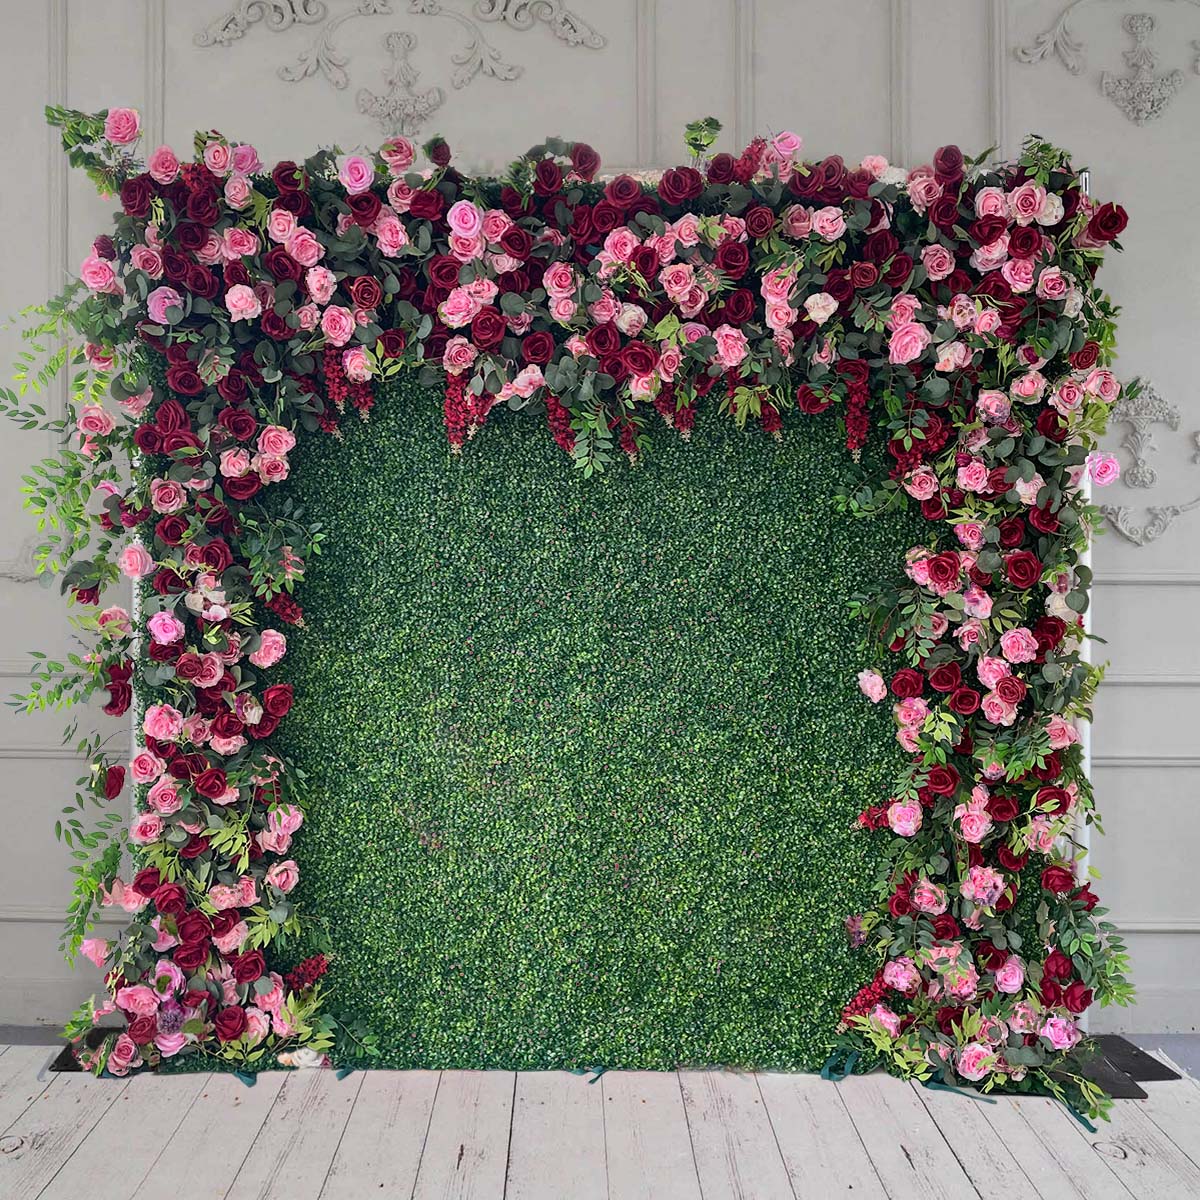 Crafted for realism, the green grass and red rose flower wall boasts a fabric backing and fade-resistant colors.